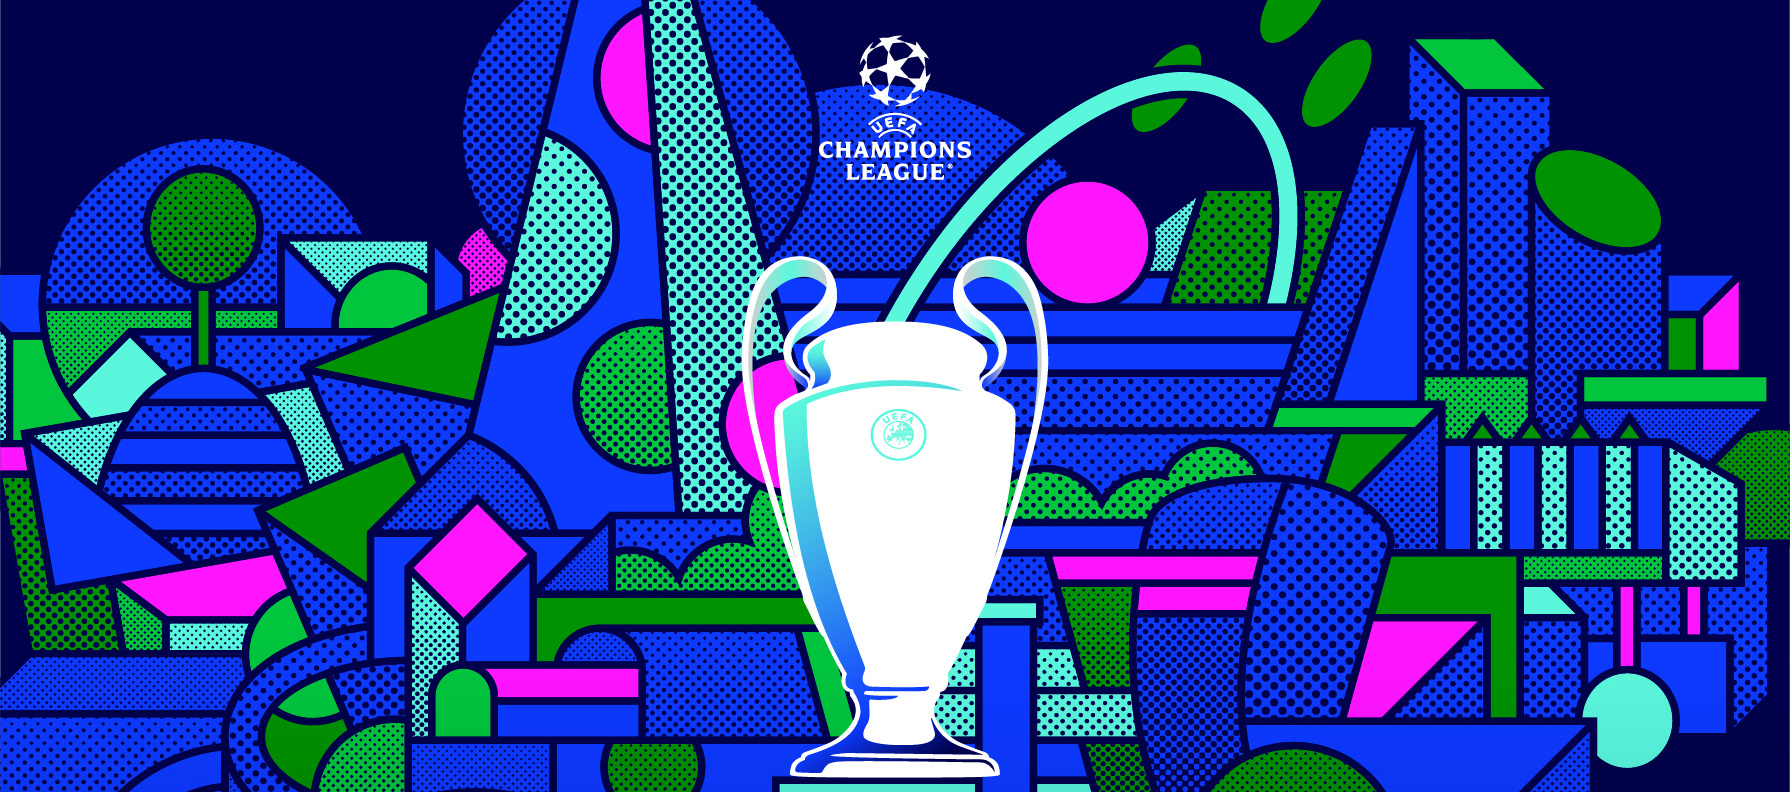 Brand identity unveiled for the 2024 UEFA Champions League final at